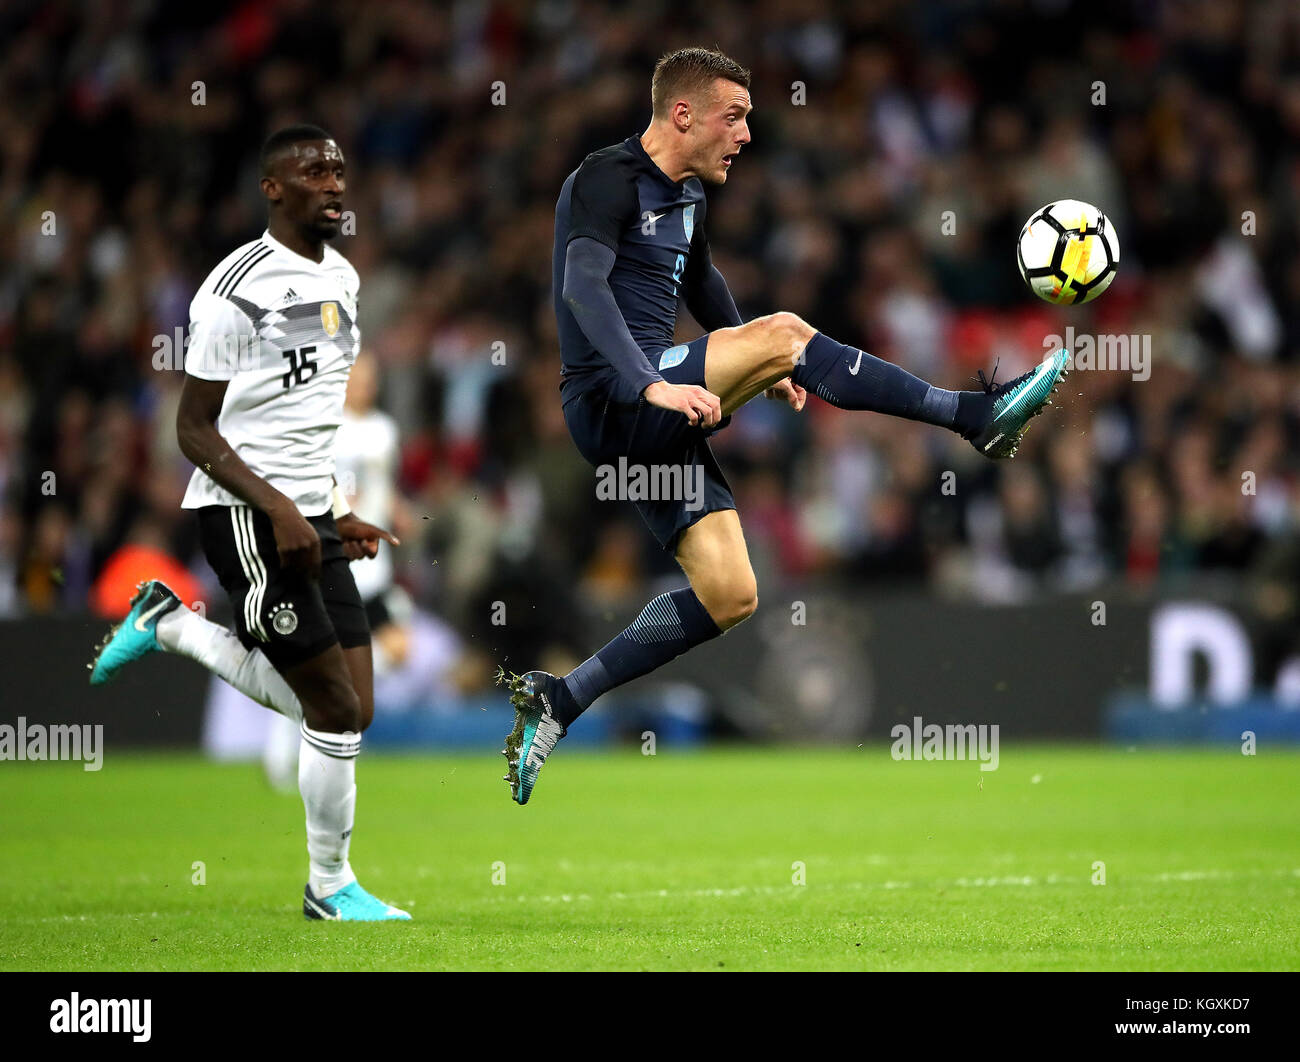 England's Jamie Vardy (centre) during the International Friendly match at Wembley Stadium, London. PRESS ASSOCIATION Photo. Picture date: Friday November 10, 2017. See PA story SOCCER England. Photo credit should read: Nick Potts/PA Wire. Stock Photo